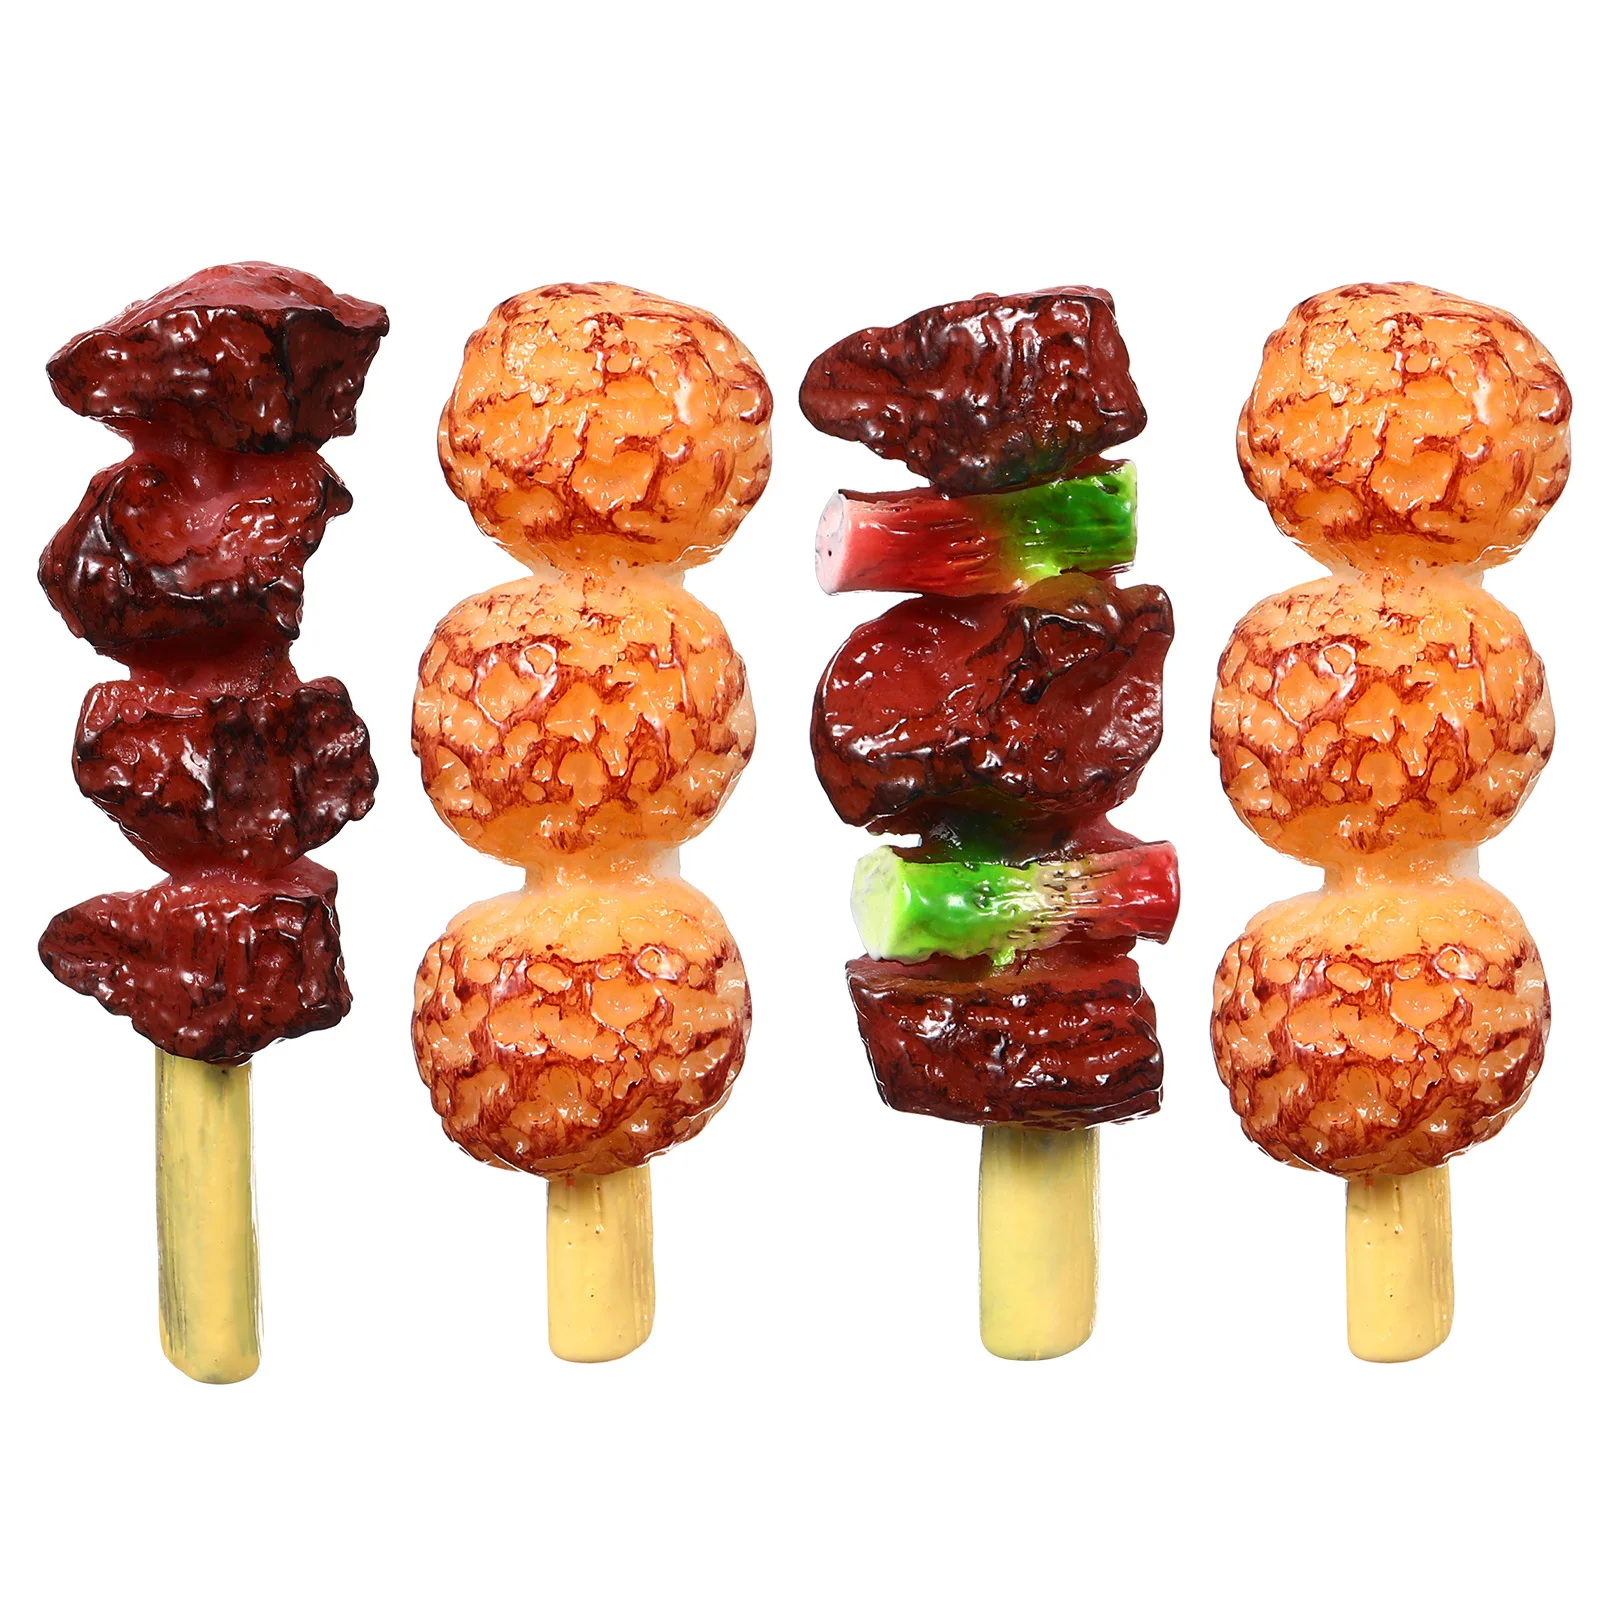 

4 Pcs Kid Playing Toys Outdoor Griddle Grill Small Gift Child Parrillas Para Asar Carne